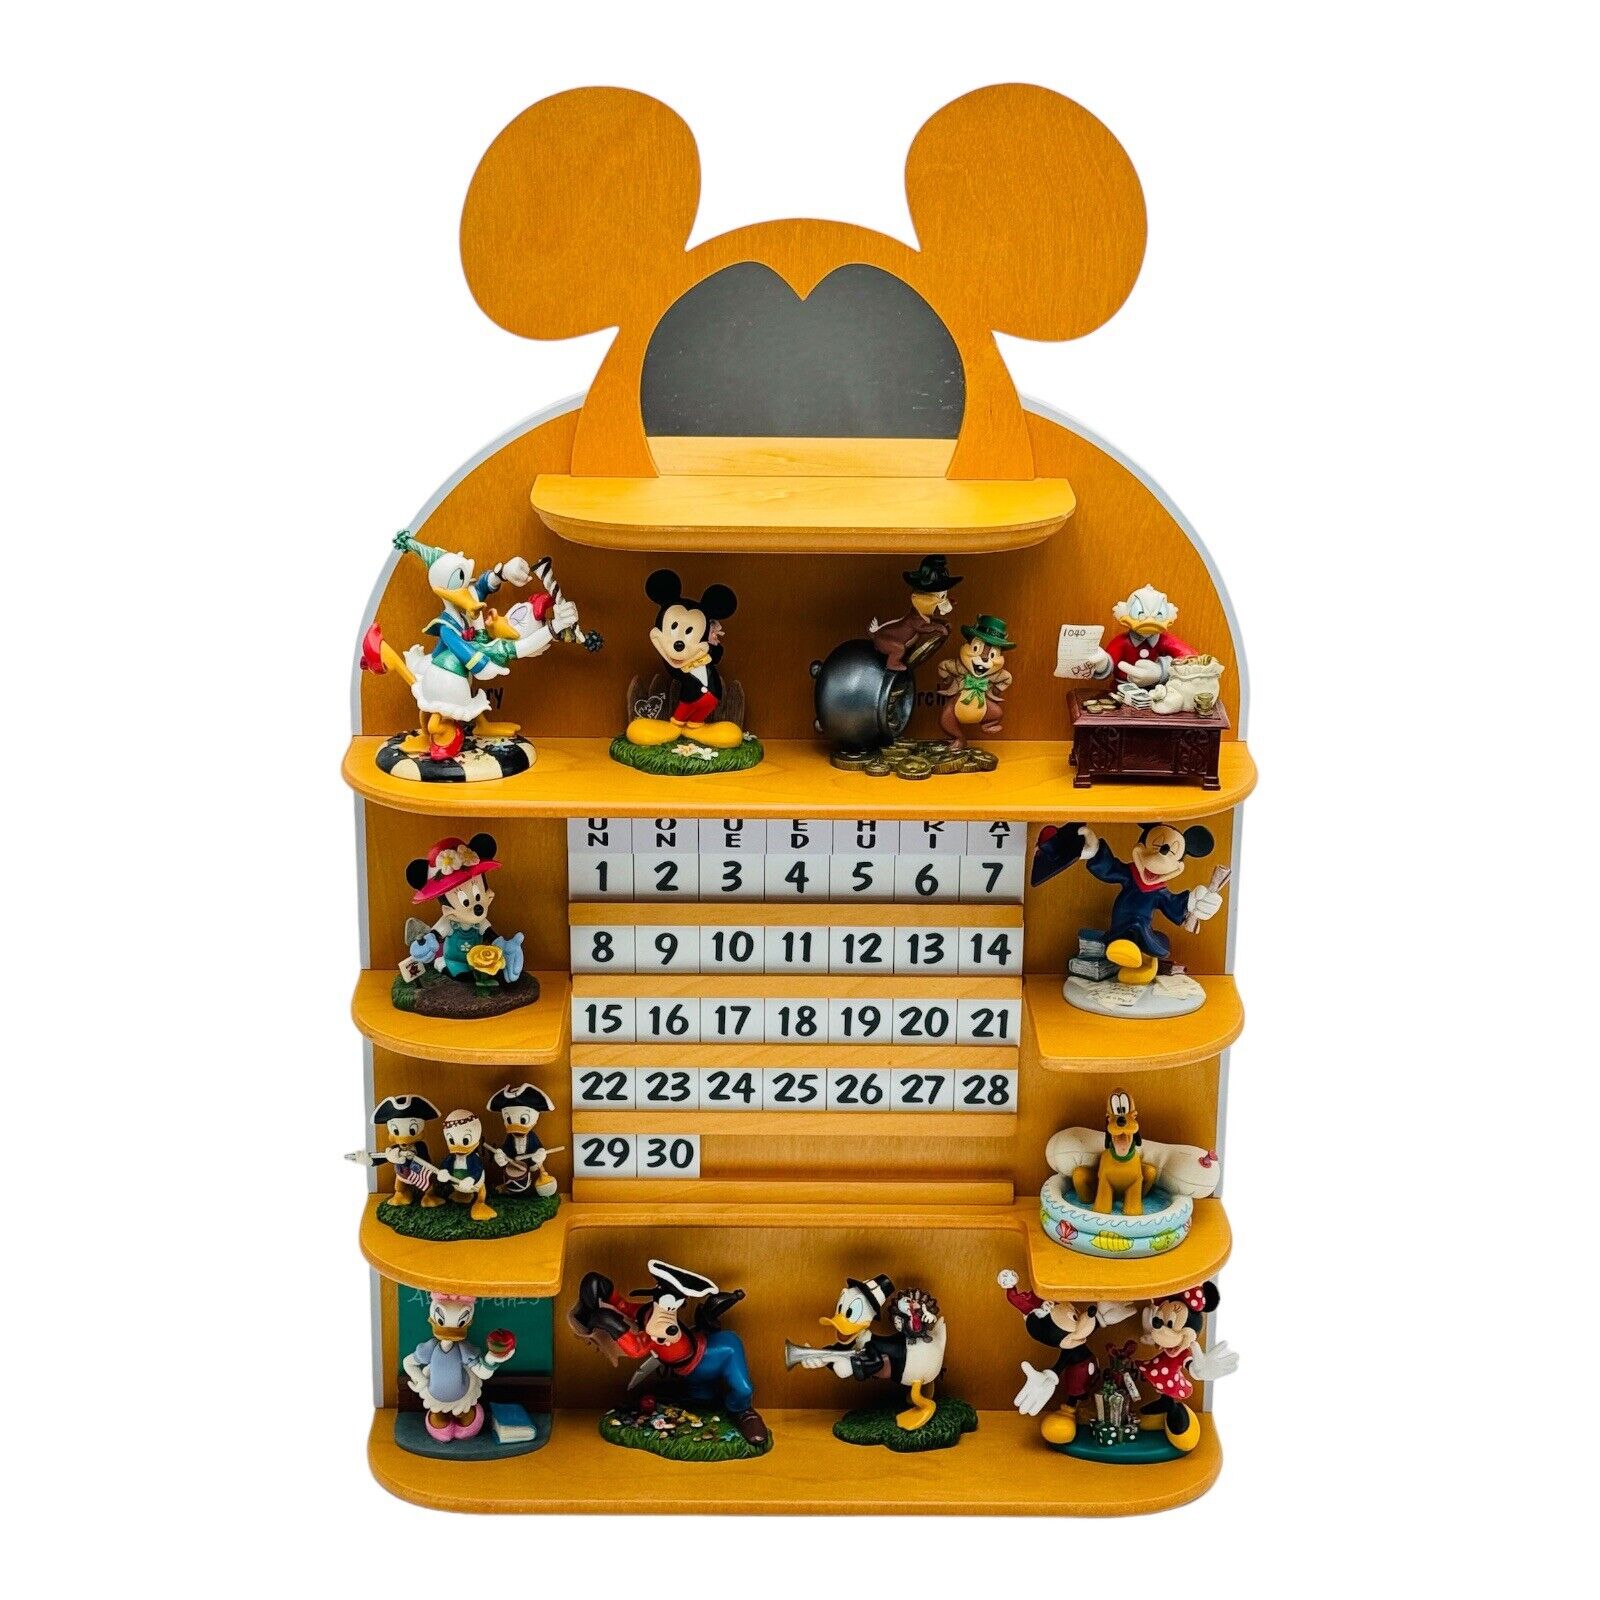 Danbury Mint Disney Classic Characters Perpetual Calendar Mickey Mouse Complete